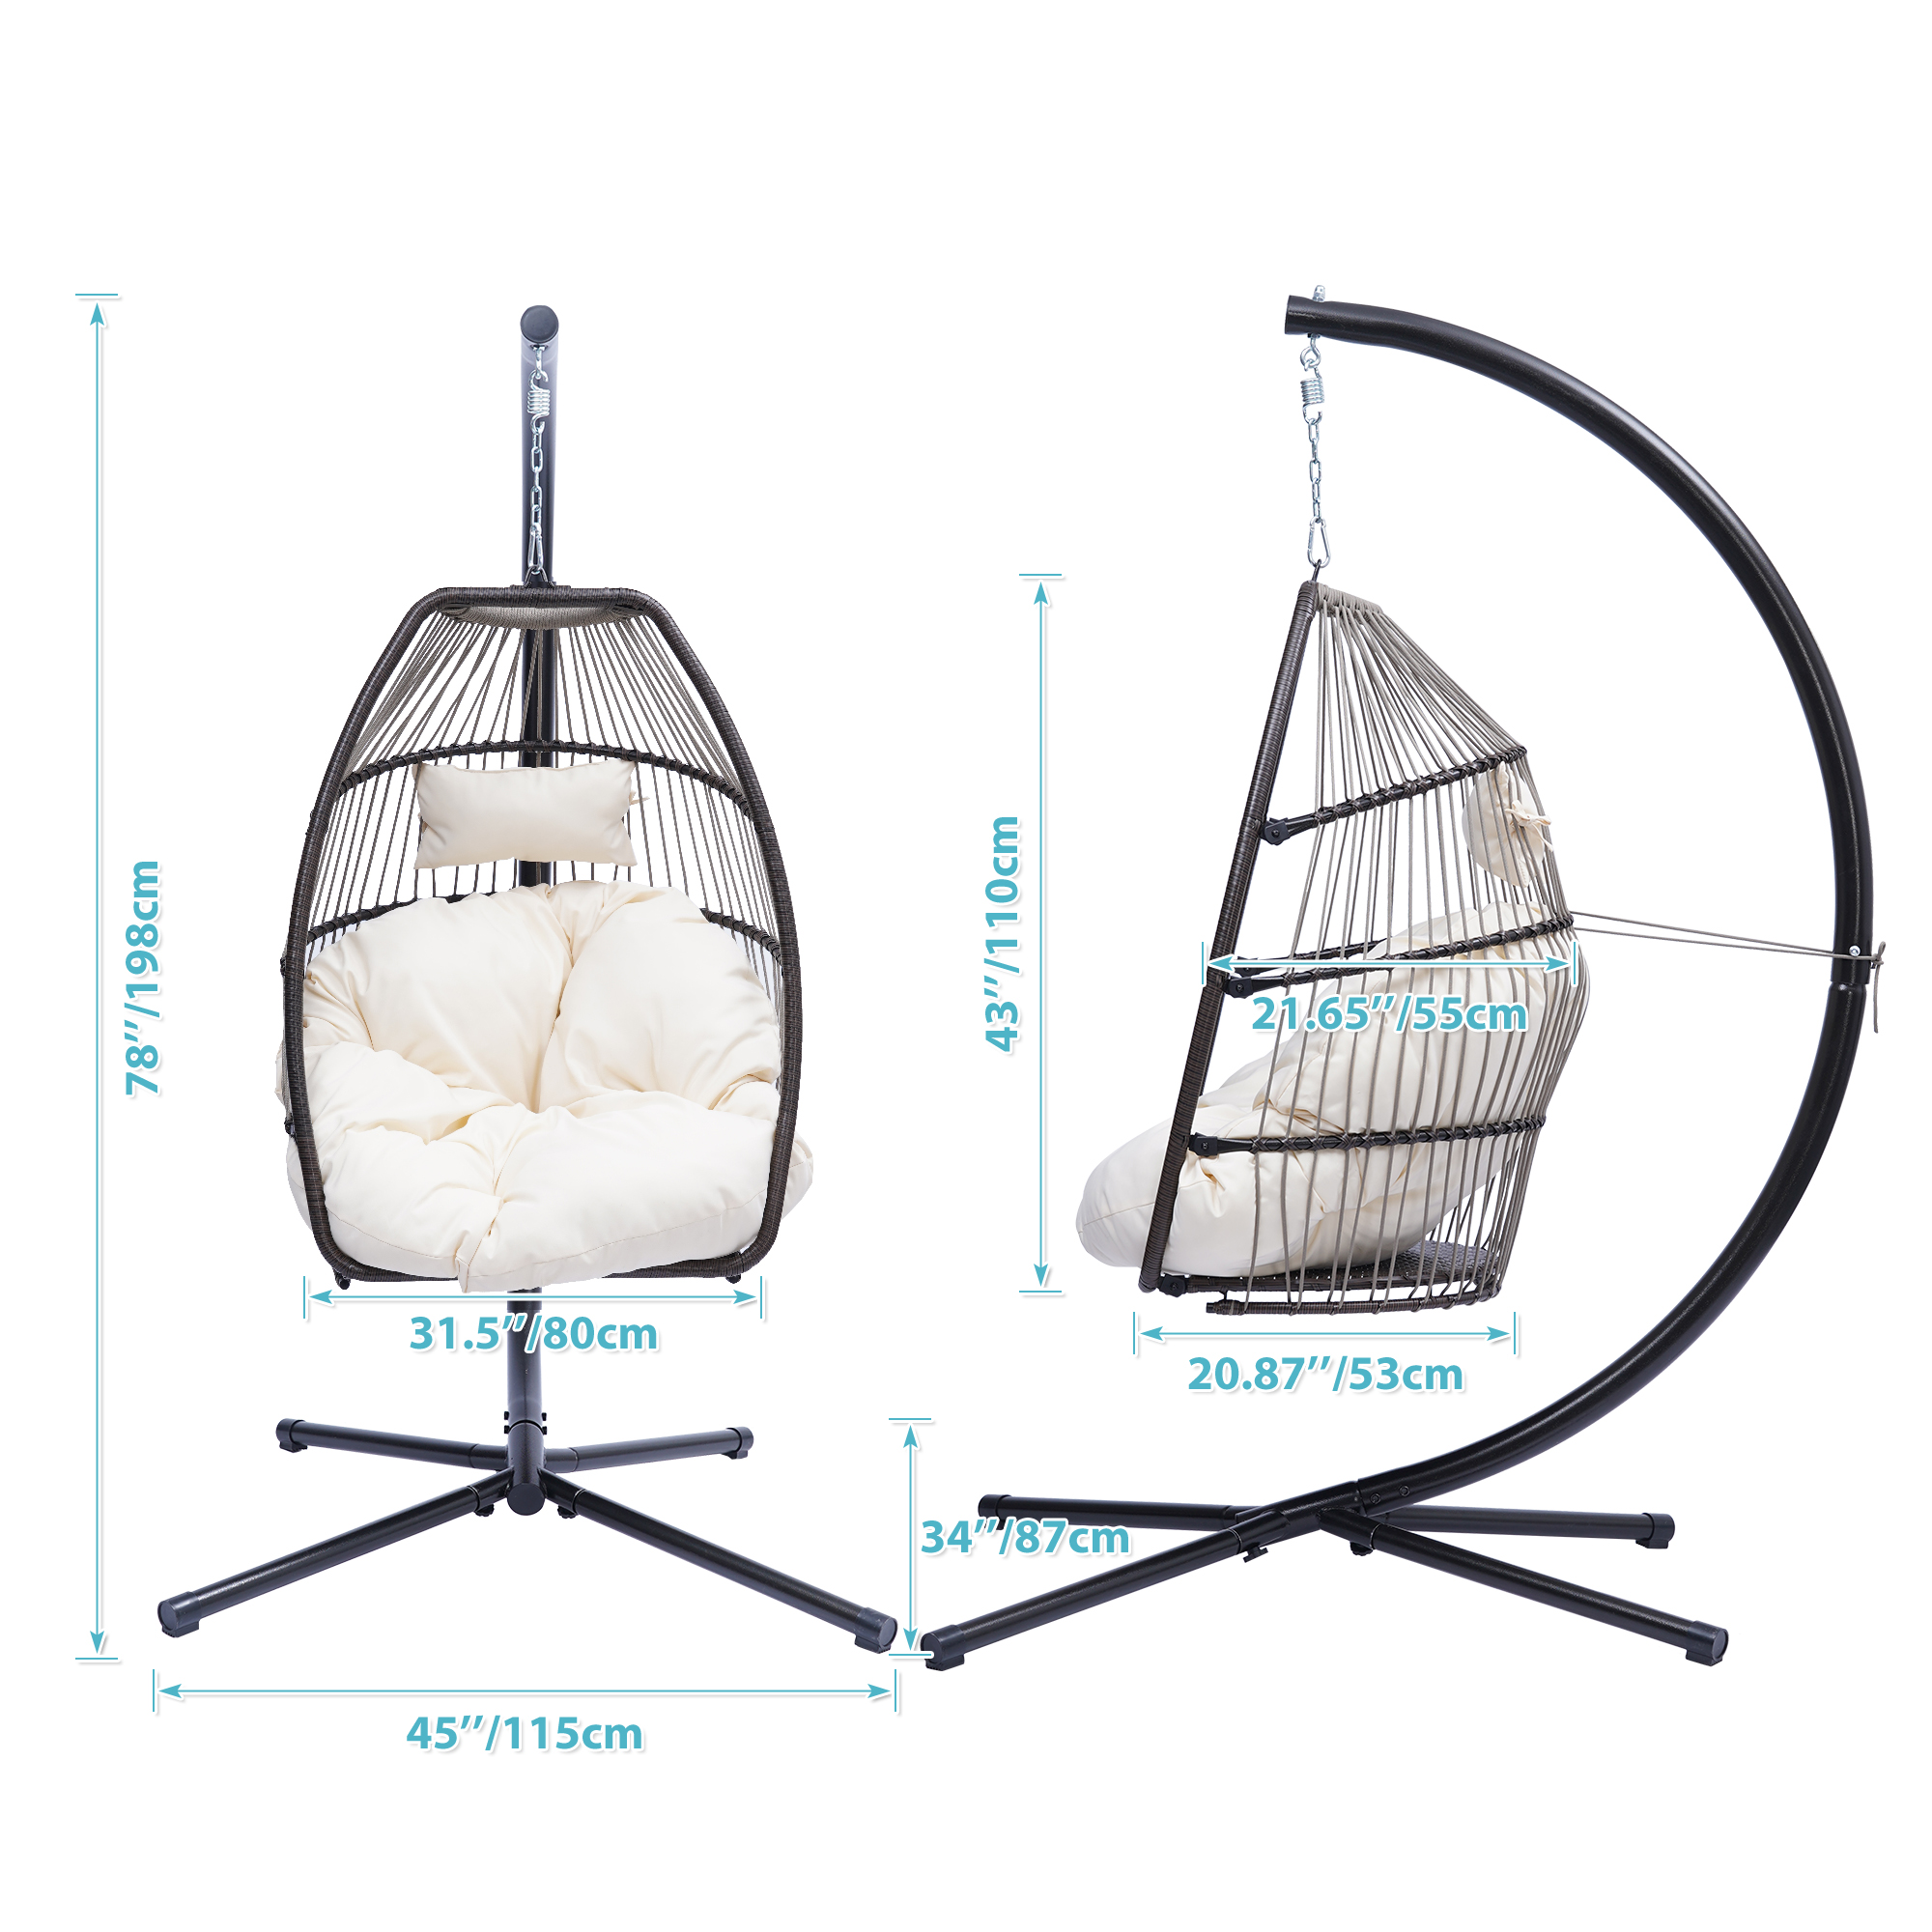 uhomepro Wicker Hanging Egg Chair, Outdoor Patio Furniture with Beige Cushion, Hanging Egg Chair with Stand, Swinging Egg Chair, Outdoor Chair for Beach, Backyard, Pool, Balcony, Lawn, W11040 - image 5 of 6